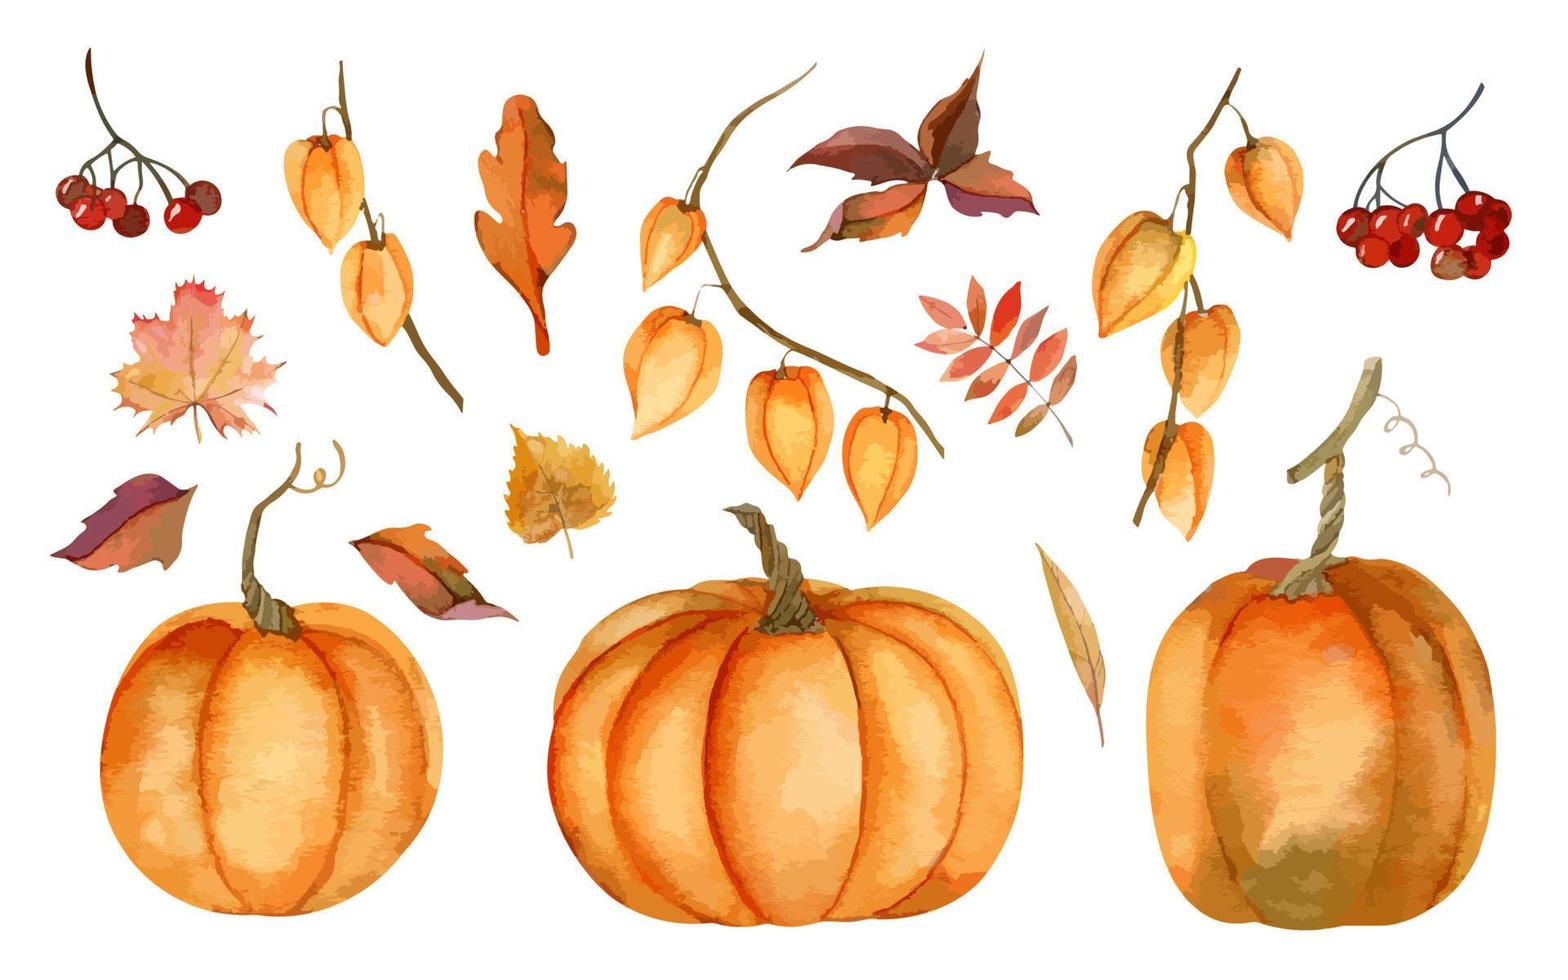 Autumn big set with orange watercolor Pumpkins and fall yellow Leaves on white isolated background. Red berry of ashberry and physalis branches. Hand drawn vector illustration